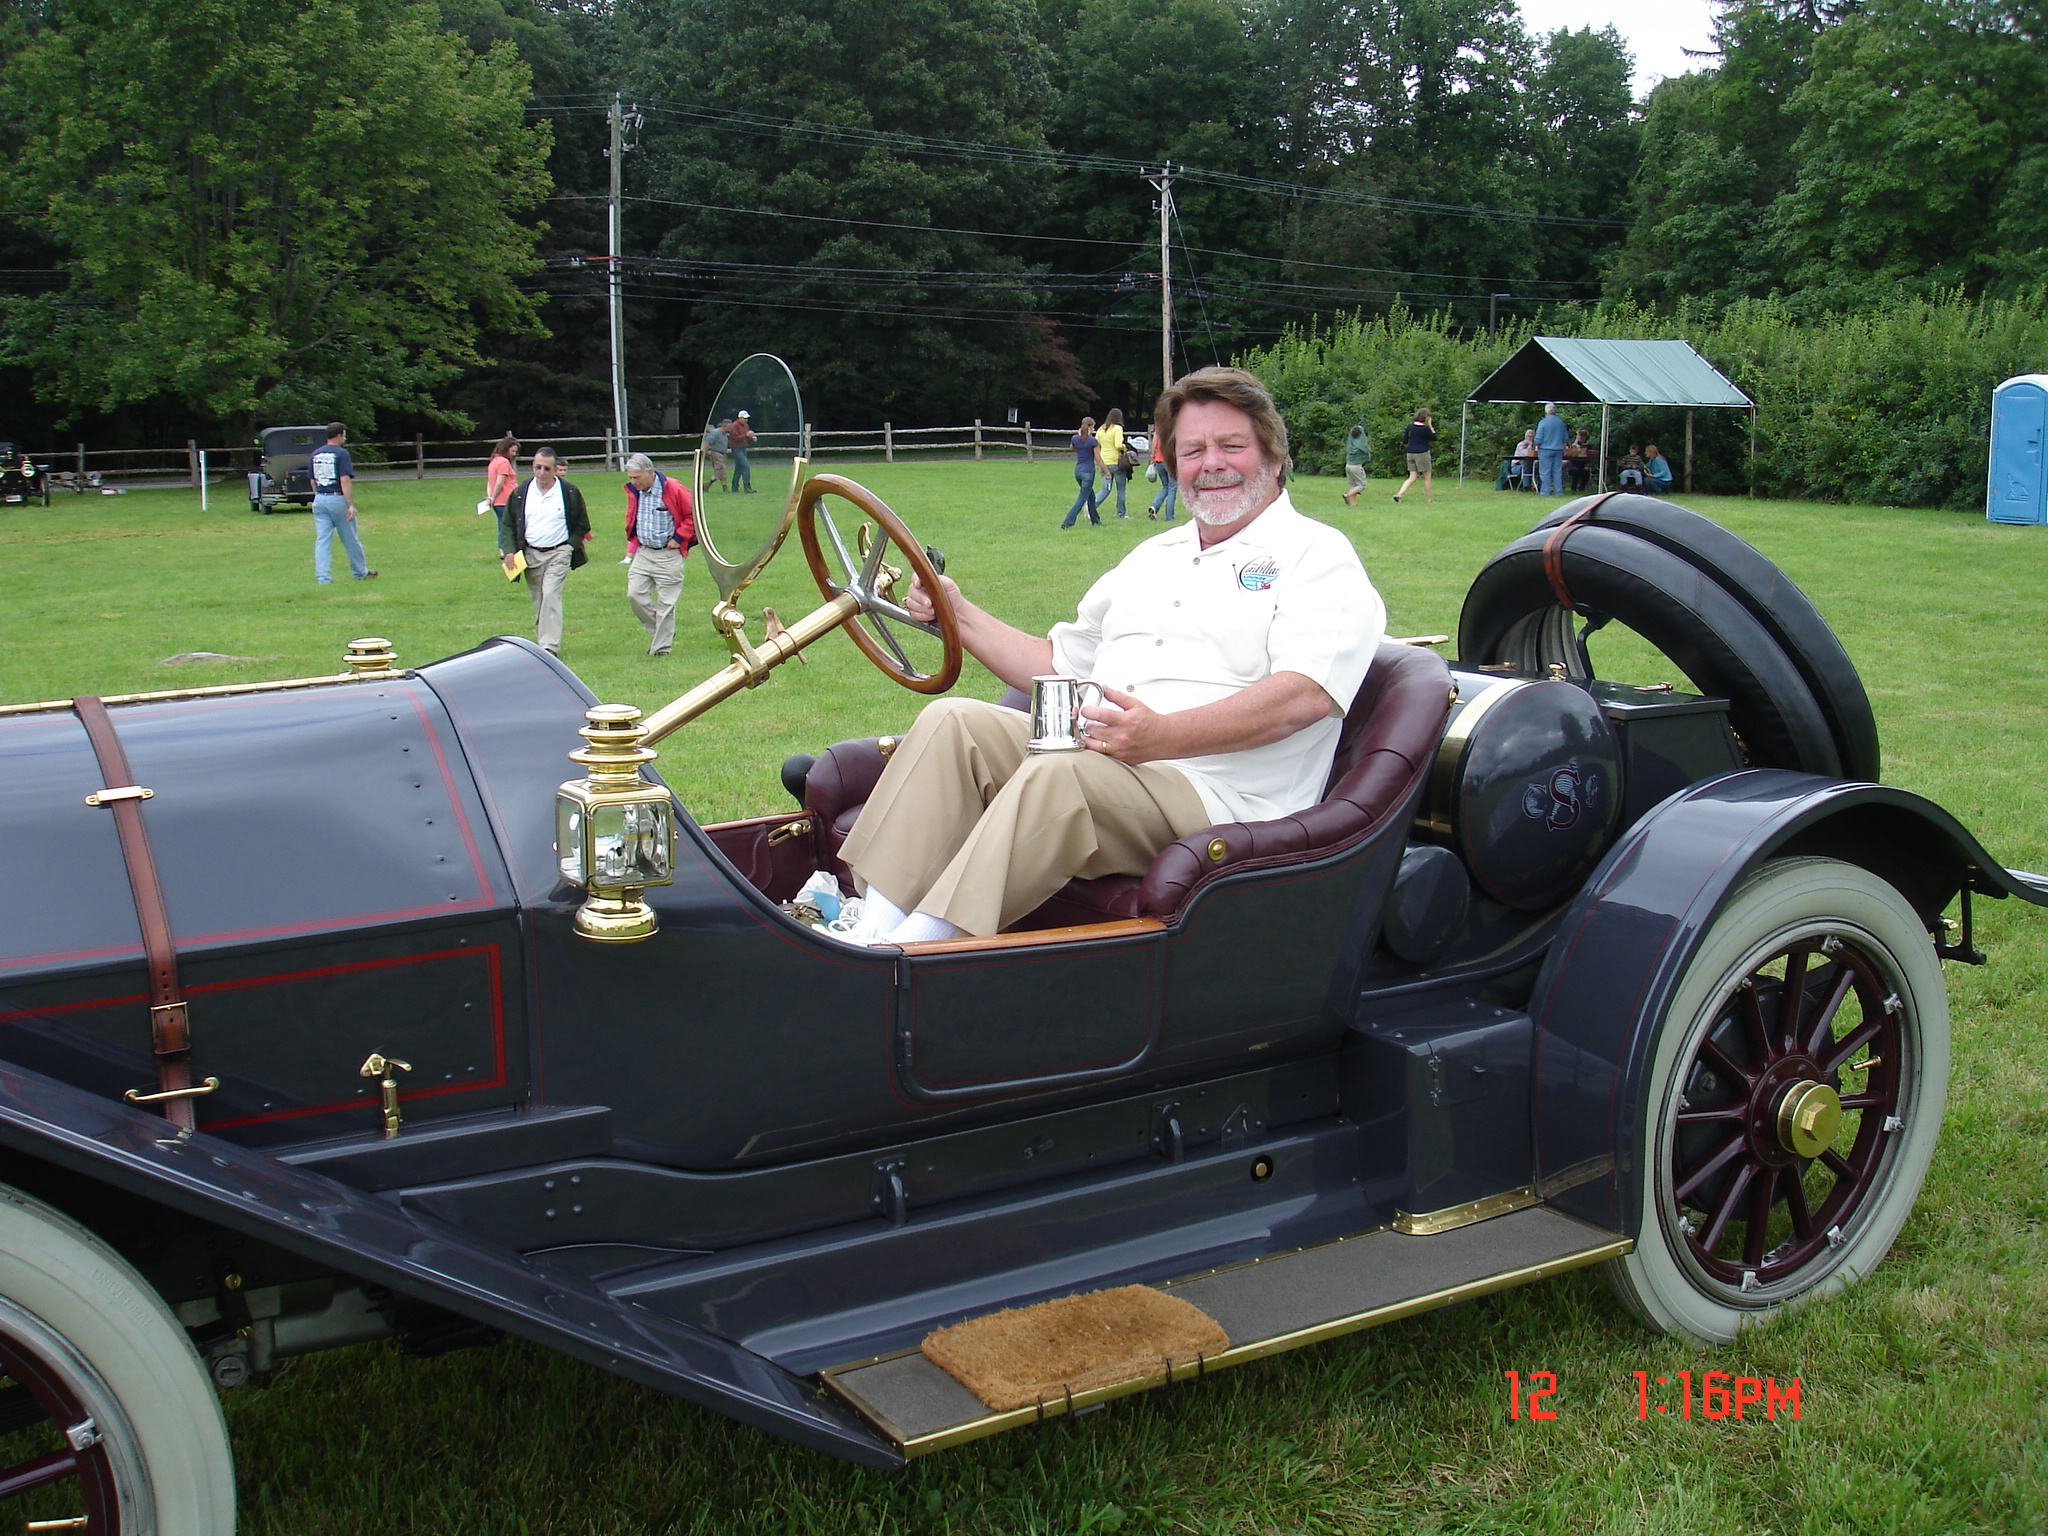 Dick sitting in the 1912 Speedwell